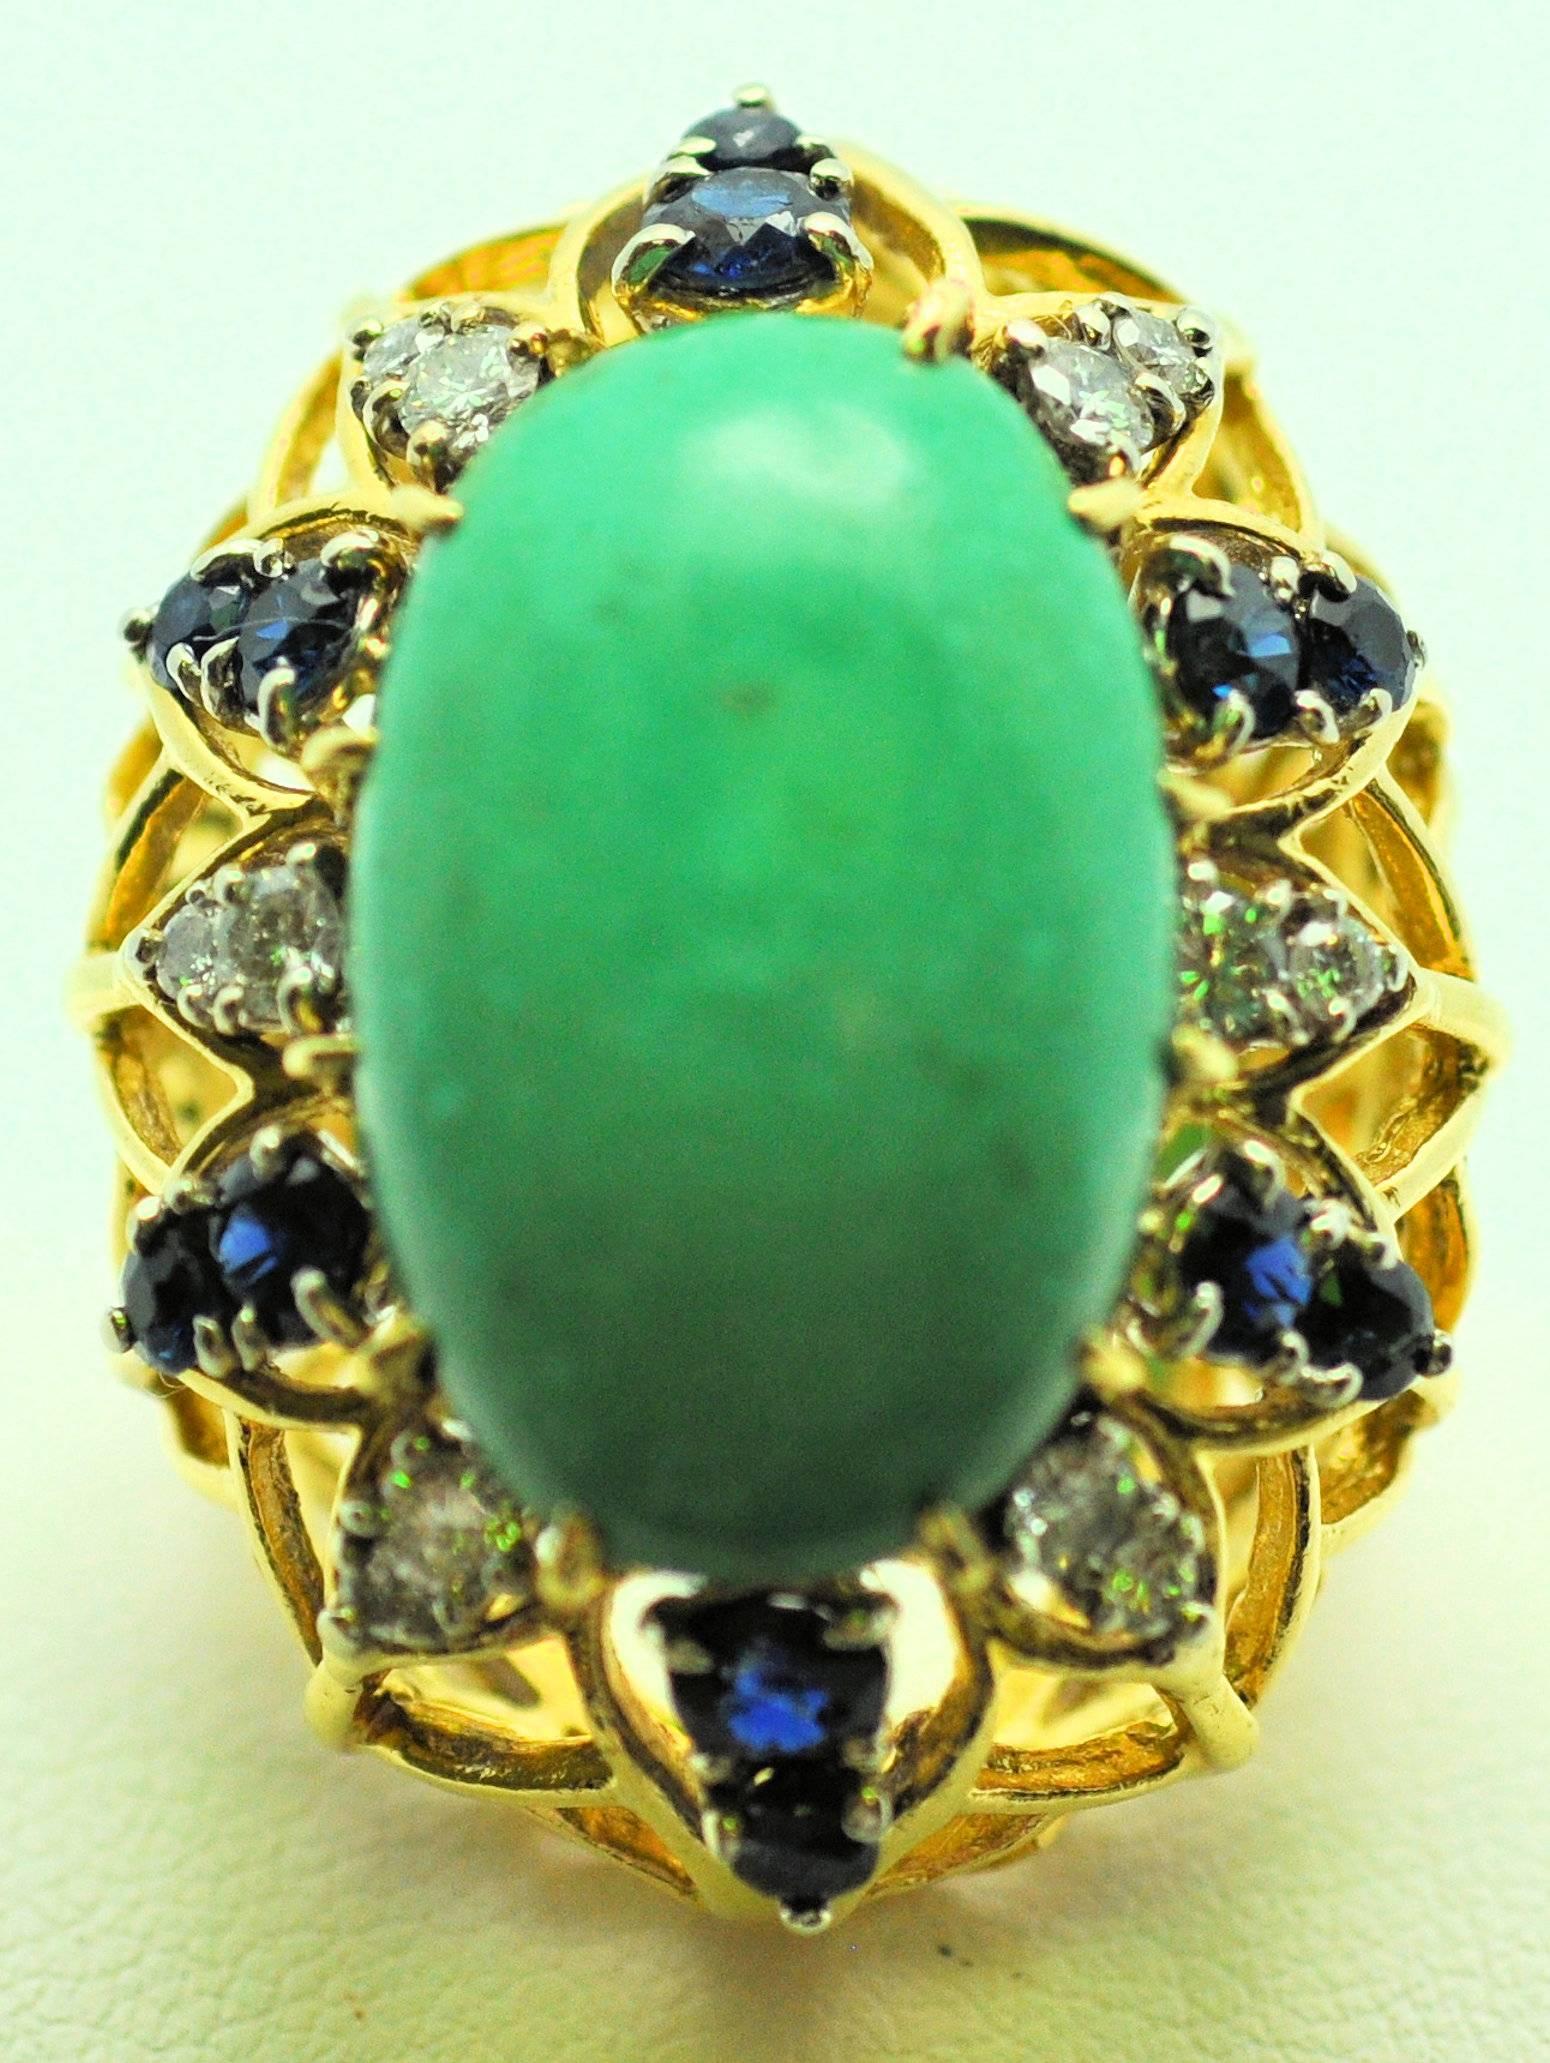 18 Karat yellow gold ring with turqoise set high surrounded by alternating sapphires and diamonds.  
Center large turquoise cabochon measuring 21.5 x 14 mm.
12 round sapphires 1.25 carat total weight 
12 round diamonds 0.45 carat total weight